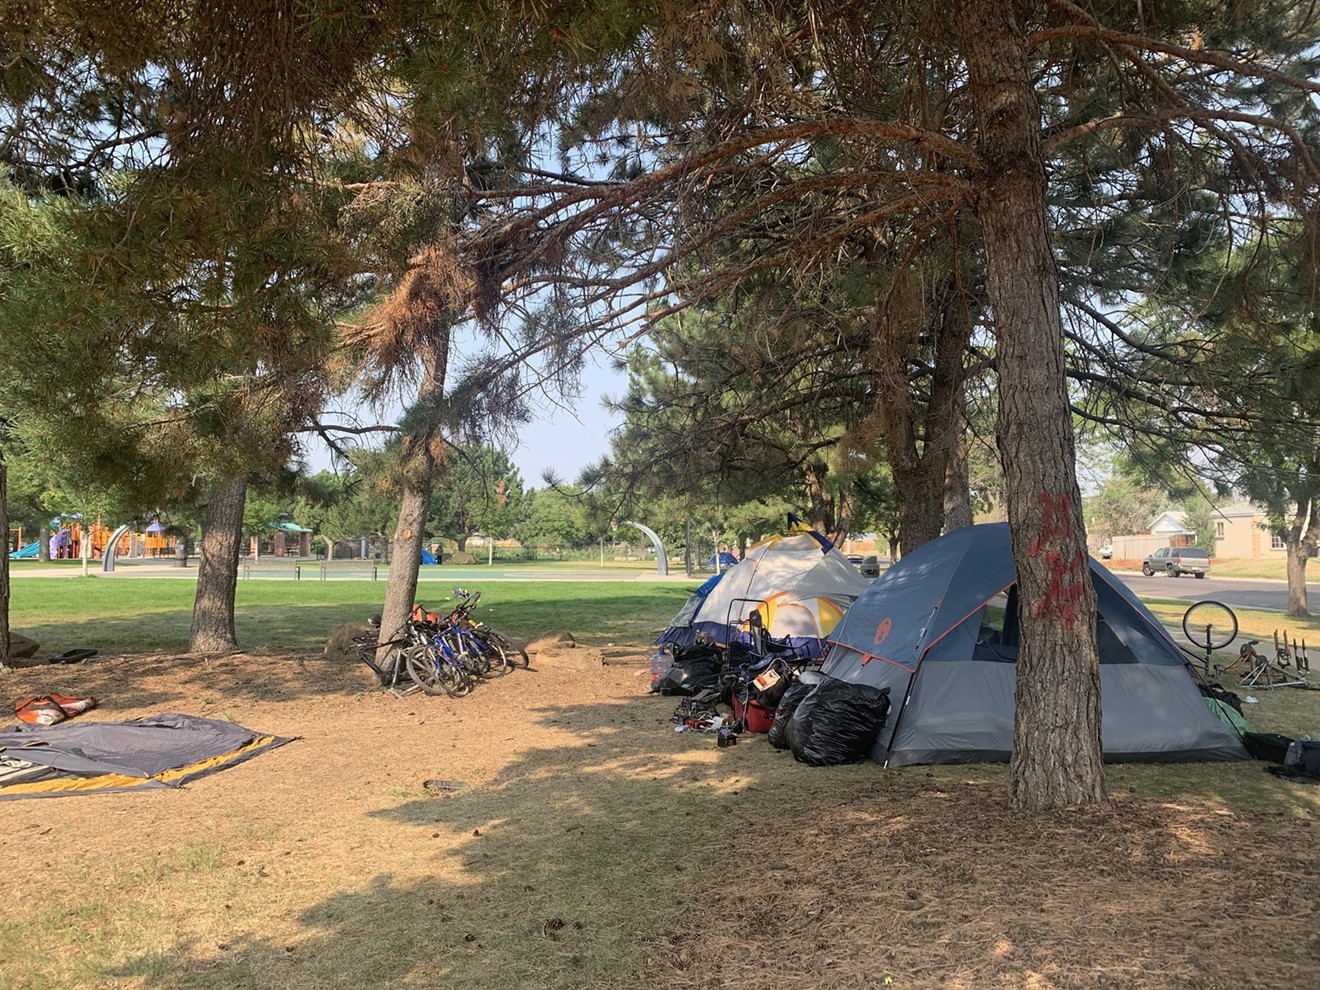 Aurora has encampments in various locations across the city.